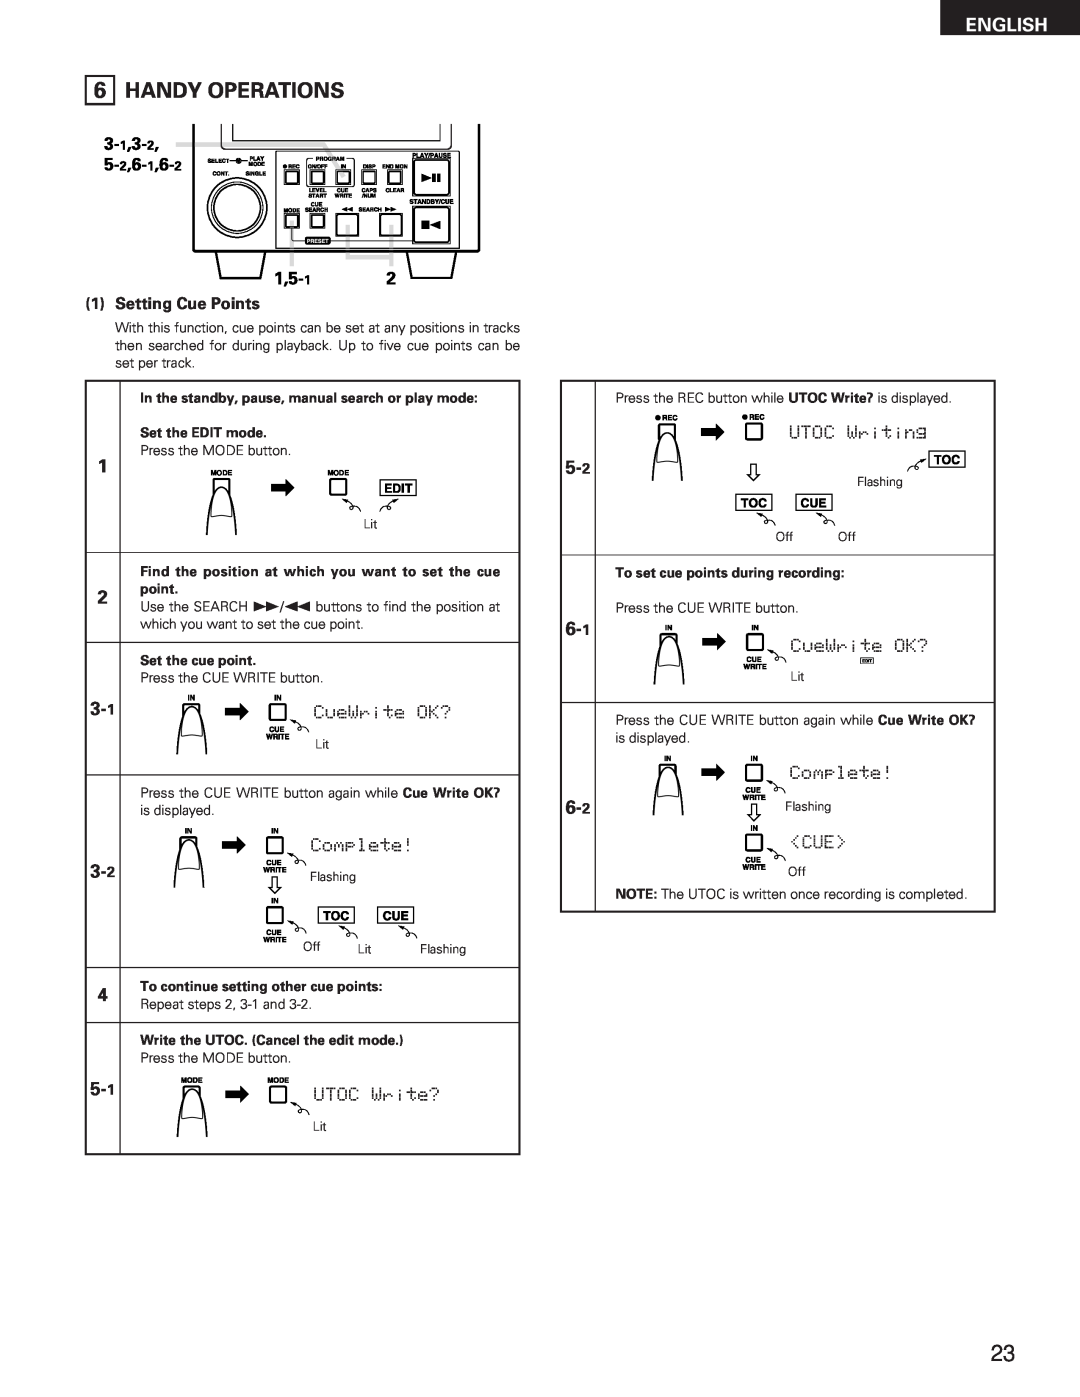 Denon DN-M991R operating instructions Handy Operations, English, Setting Cue Points 